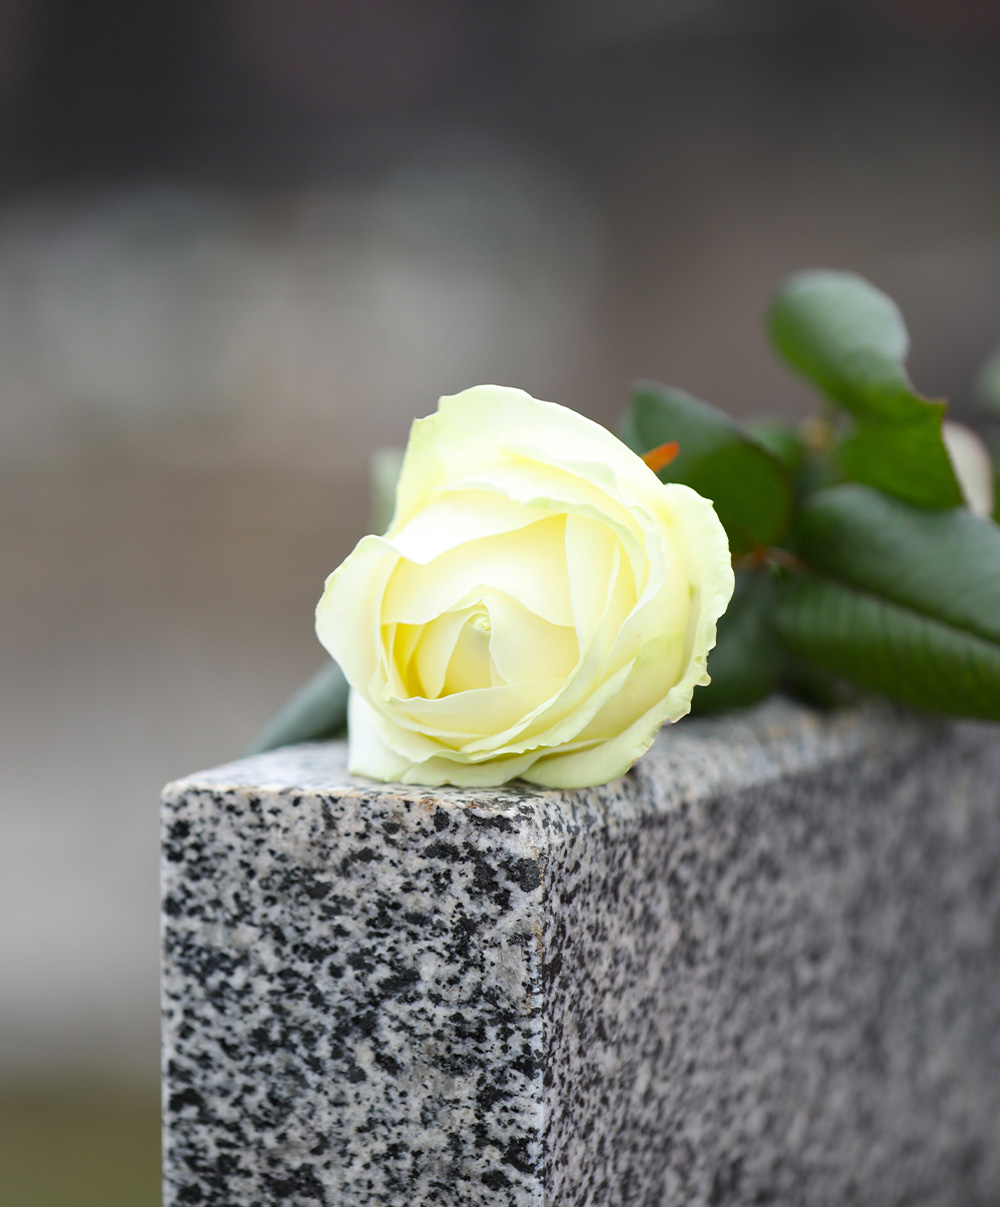 Flower on a grave stone